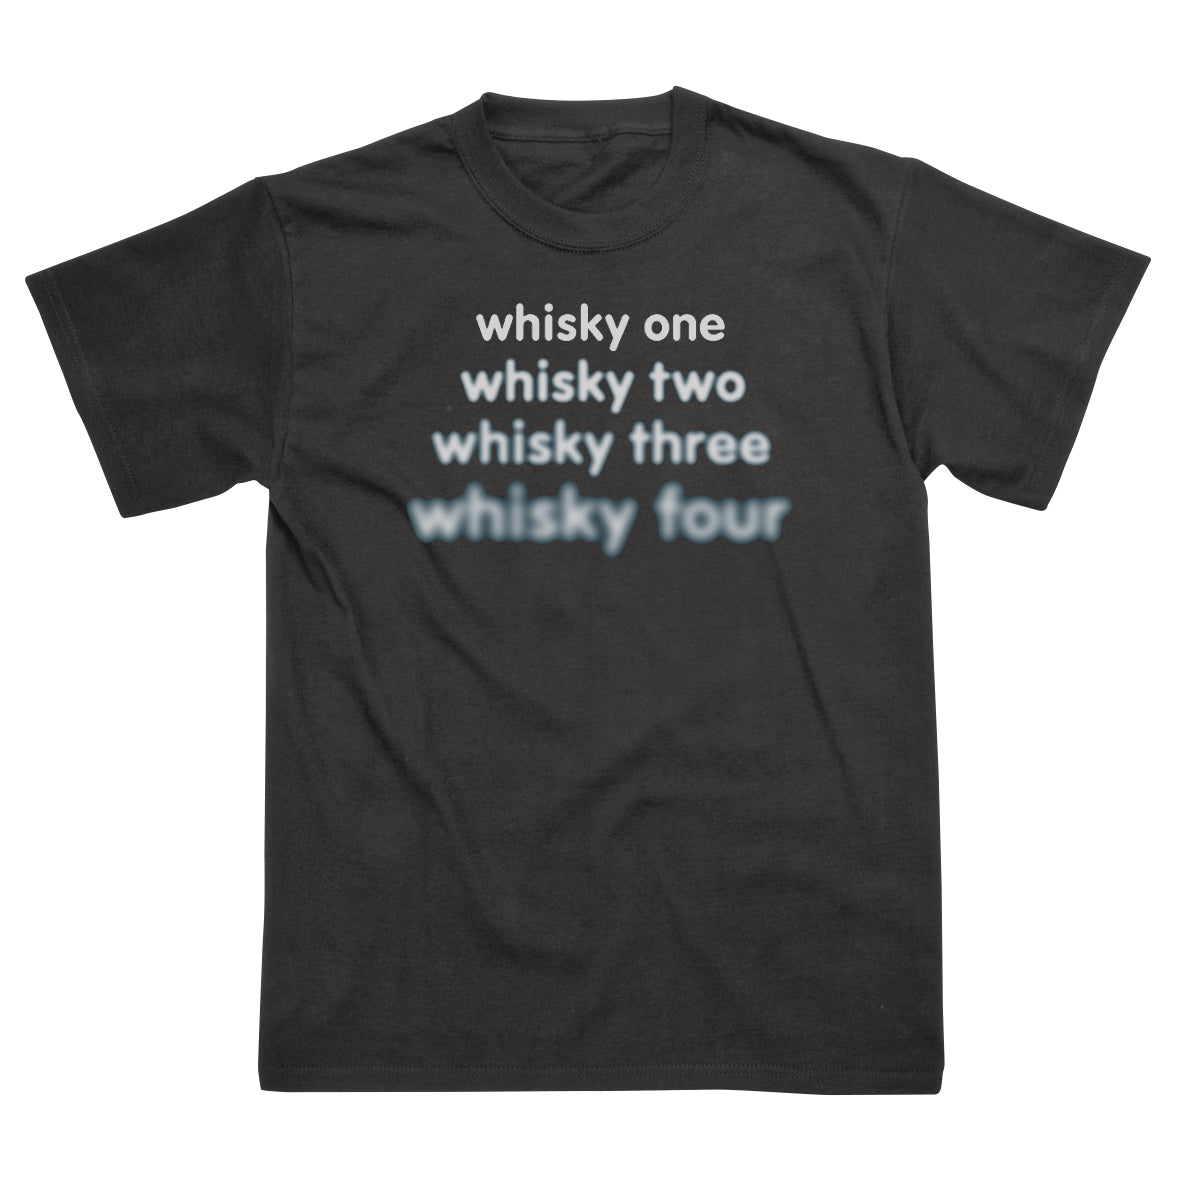 WHISKY ONE T-SHIRT